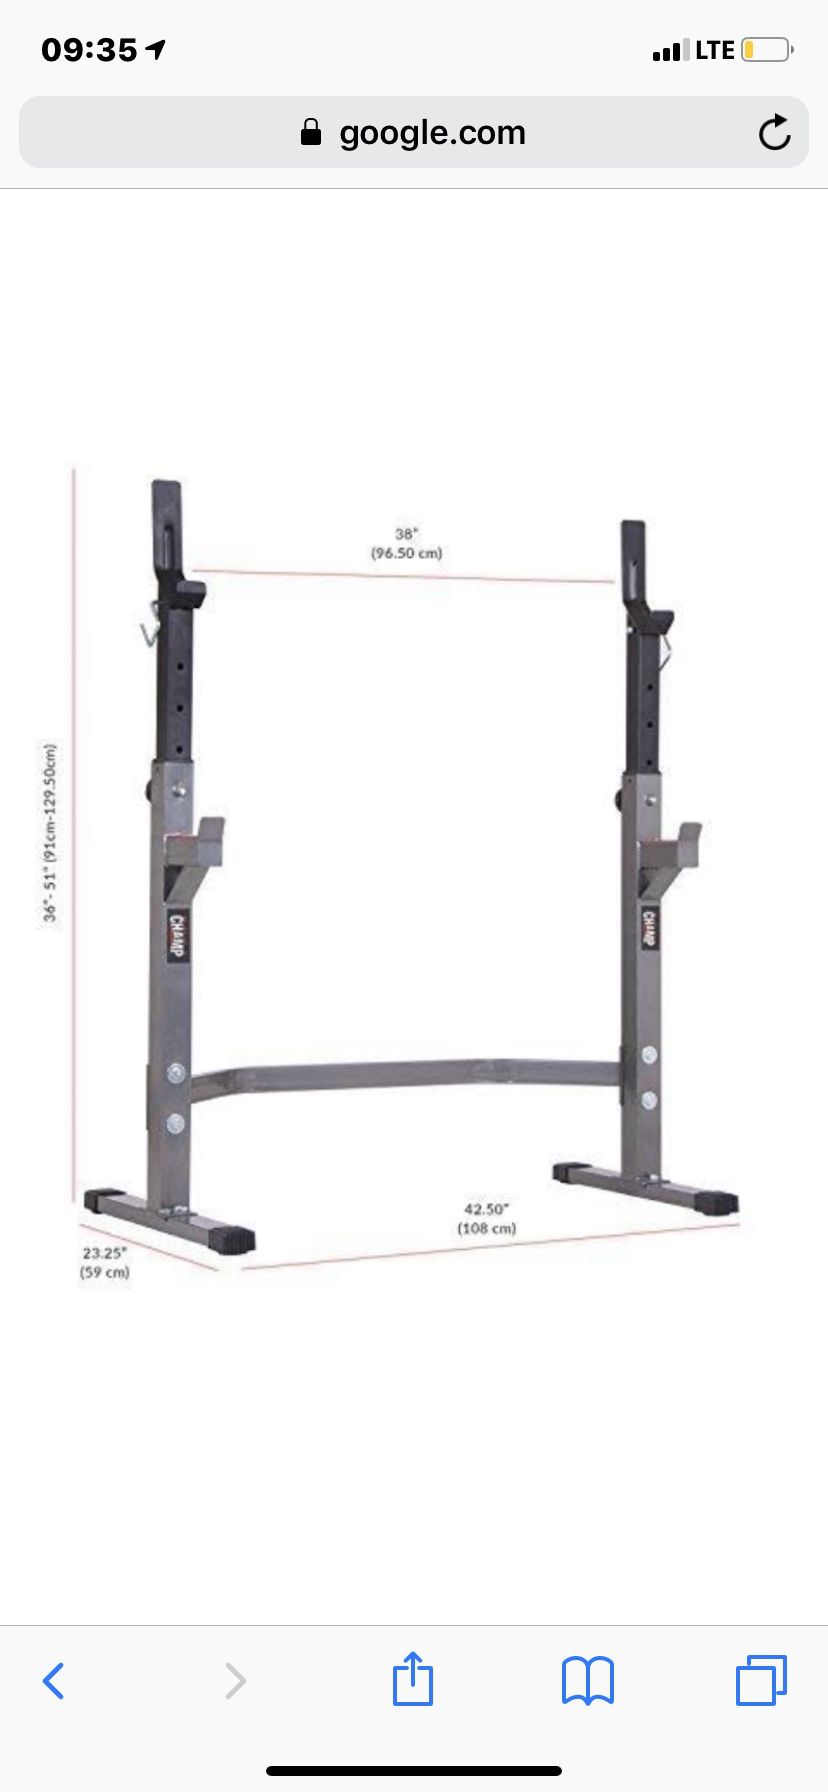 Weights / exercise equipment